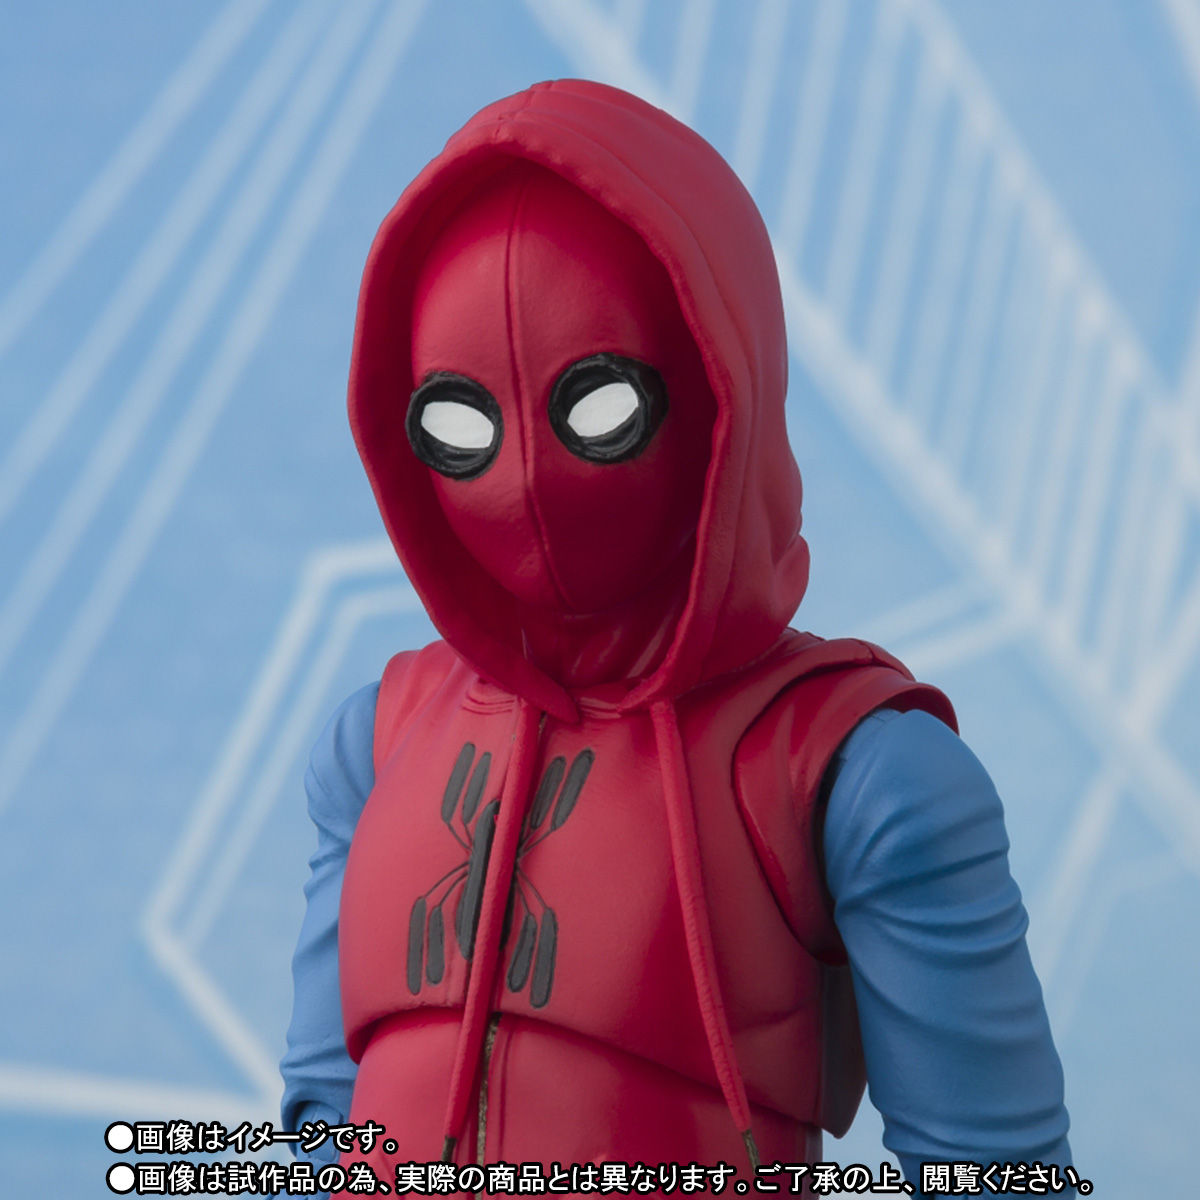 S.H.Figuarts - Spider-Man: Homecoming - Iron Man Mark 47 and Spider-Man (Homemade Suit Ver.) (TamashiiWeb Exclusive) - Marvelous Toys